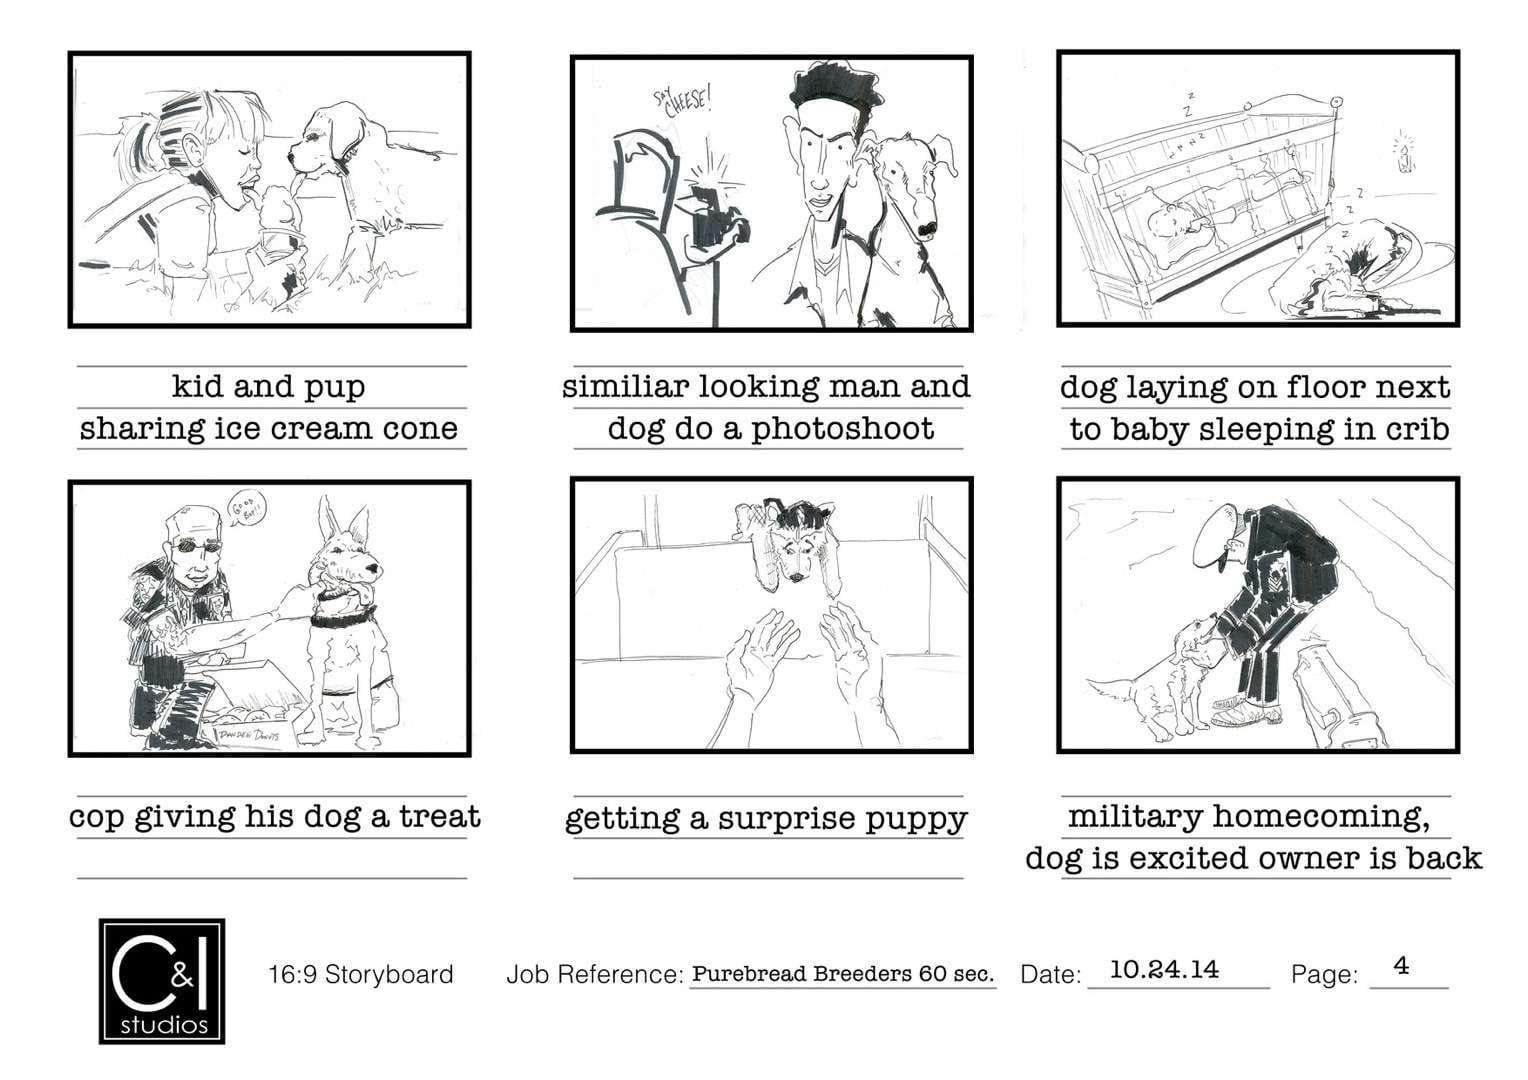 Storyboard art for Purebred Breeders Page 4